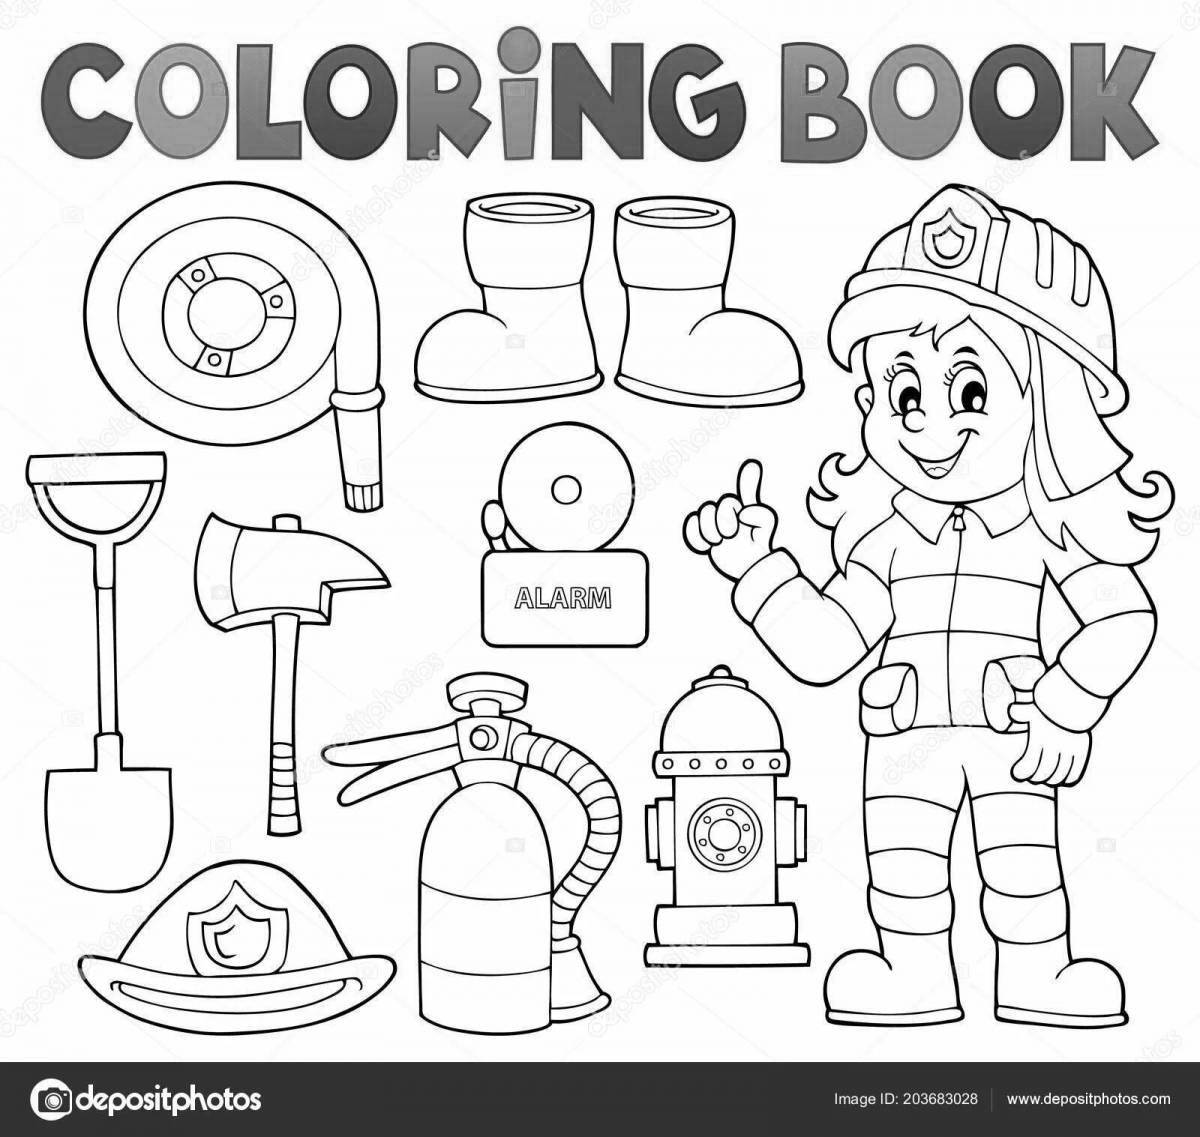 Great fire shield coloring book for kids